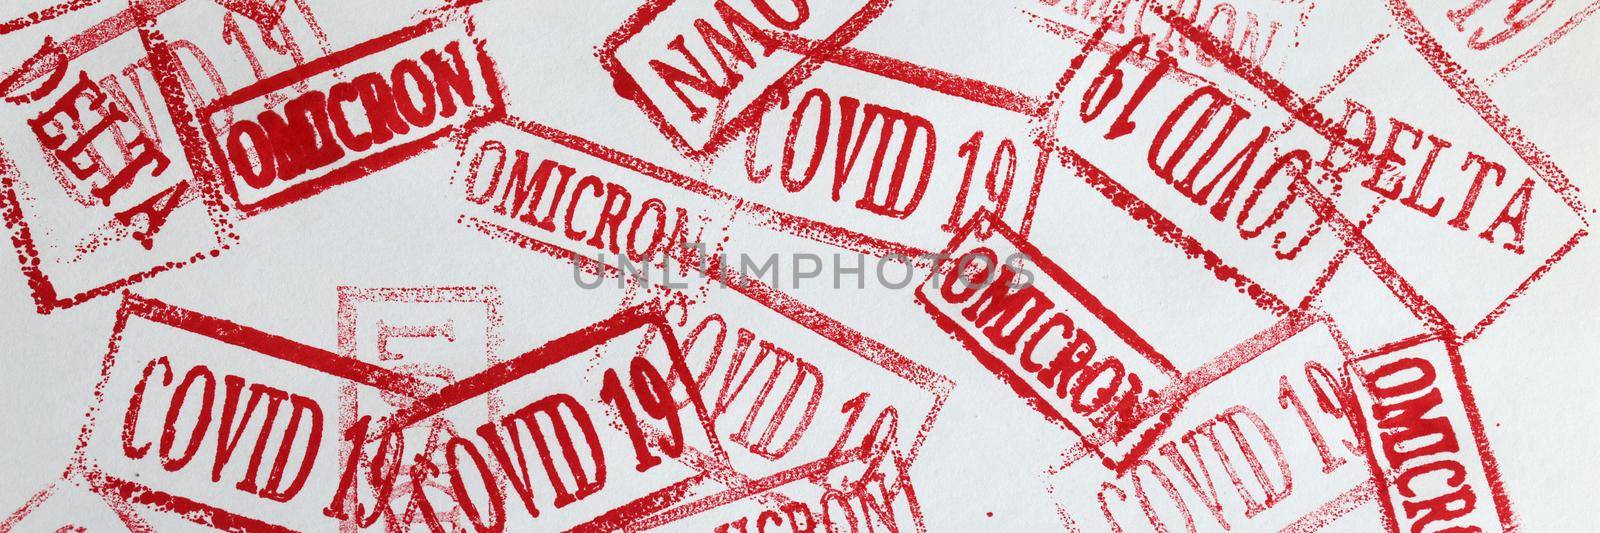 Red ink stamps covid19 and omicron delta lockdown closeup background by kuprevich